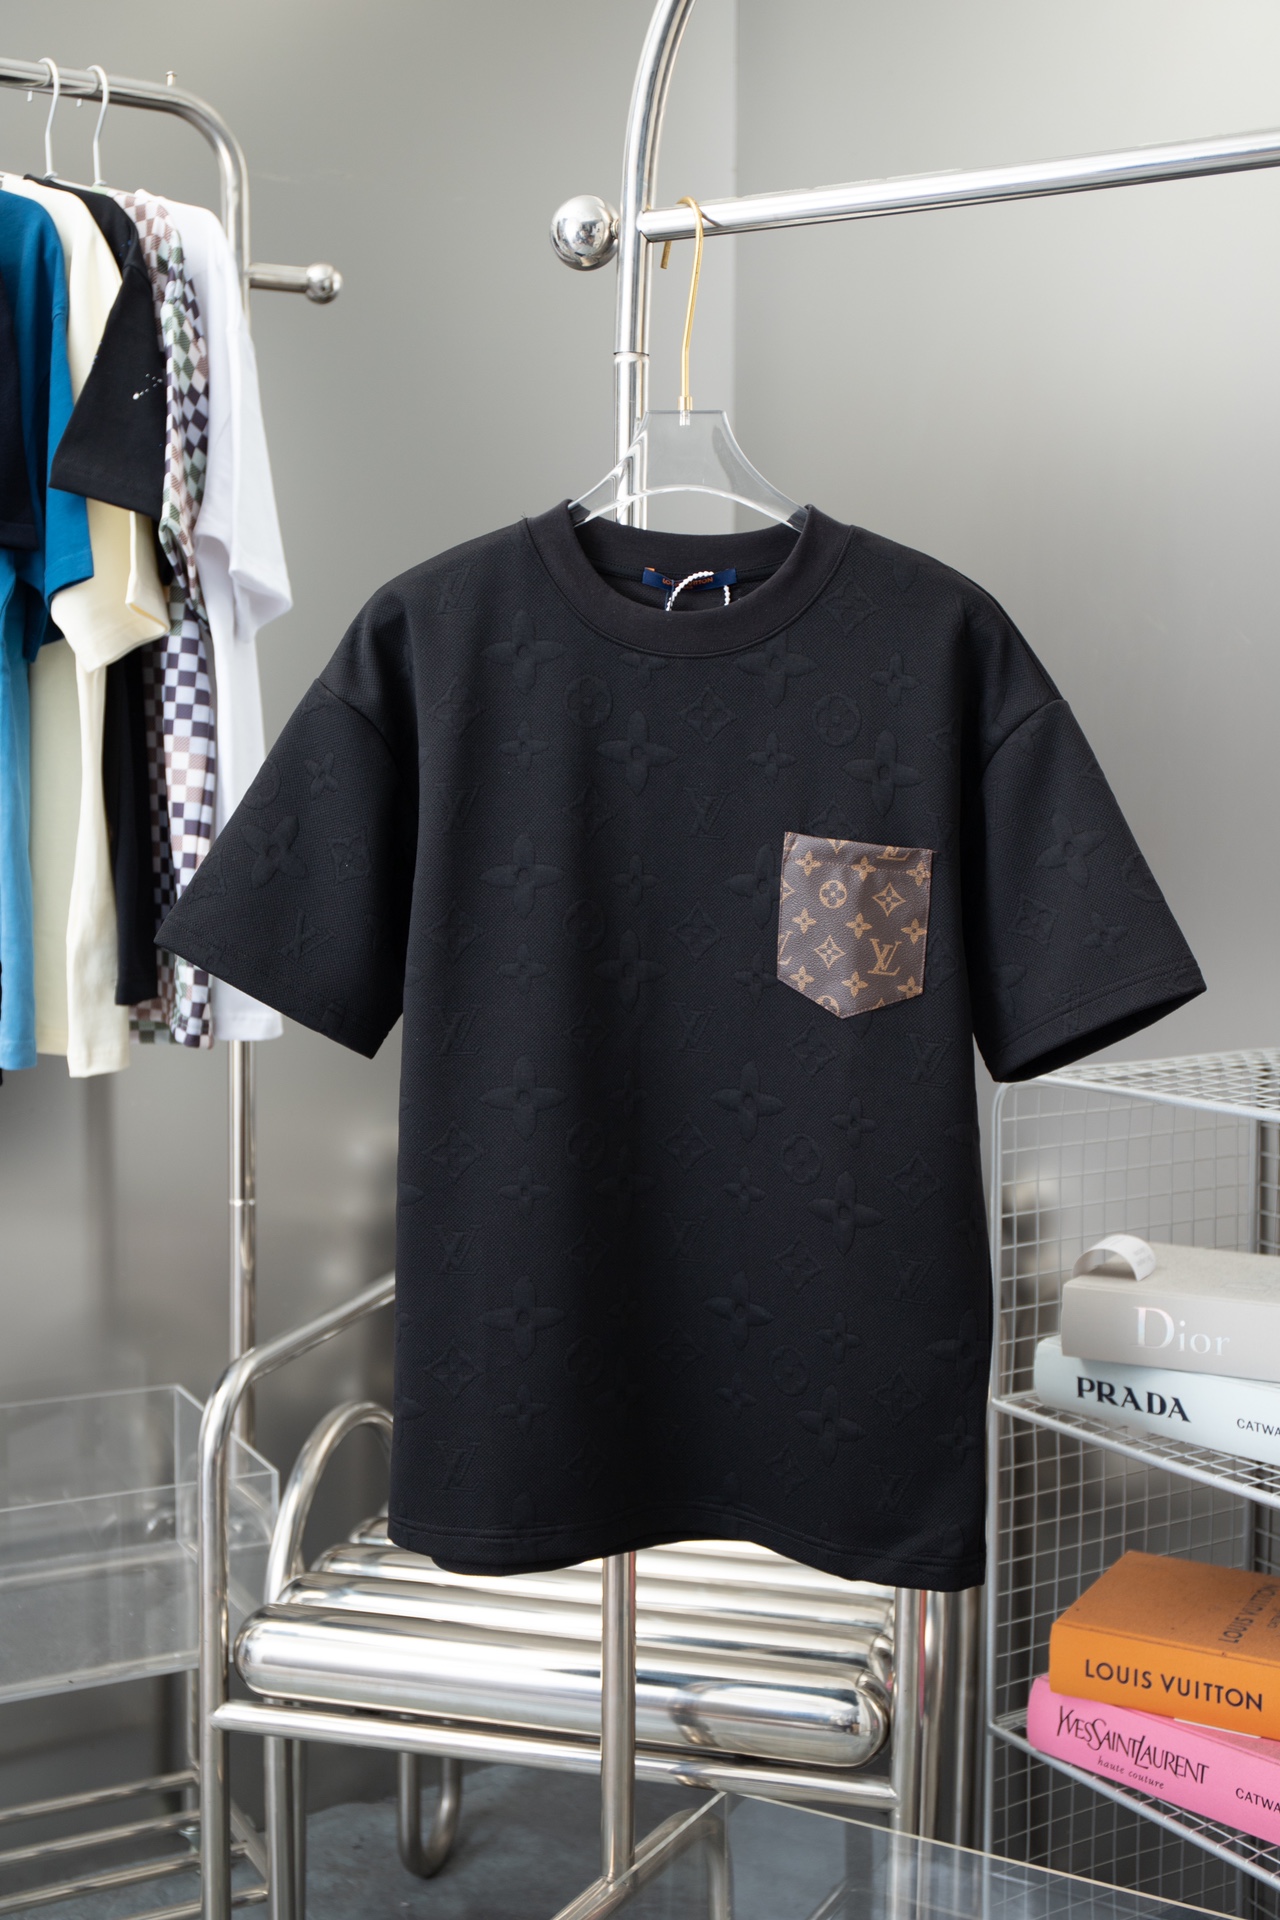 Louis Vuitton Clothing T-Shirt Unisex Cotton Spring/Summer Collection Fashion Short Sleeve